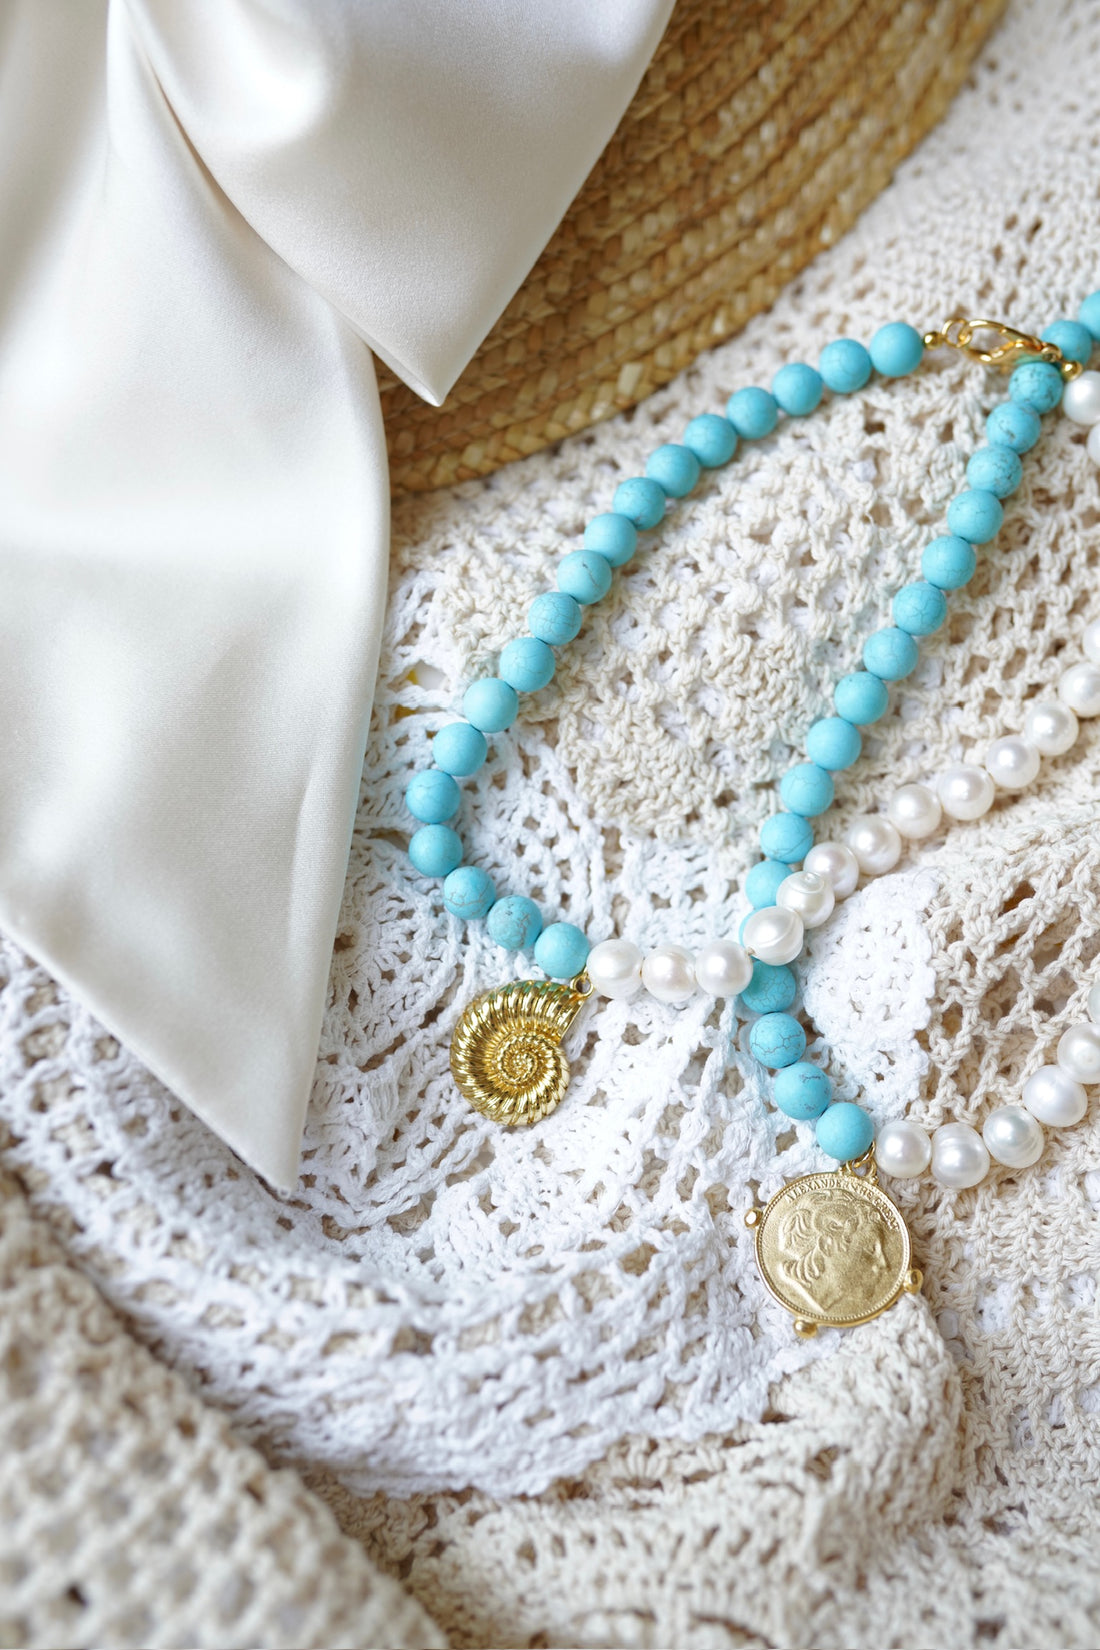 Limited Edition: Freshwater Pearl & Turquoise Pendant Necklace